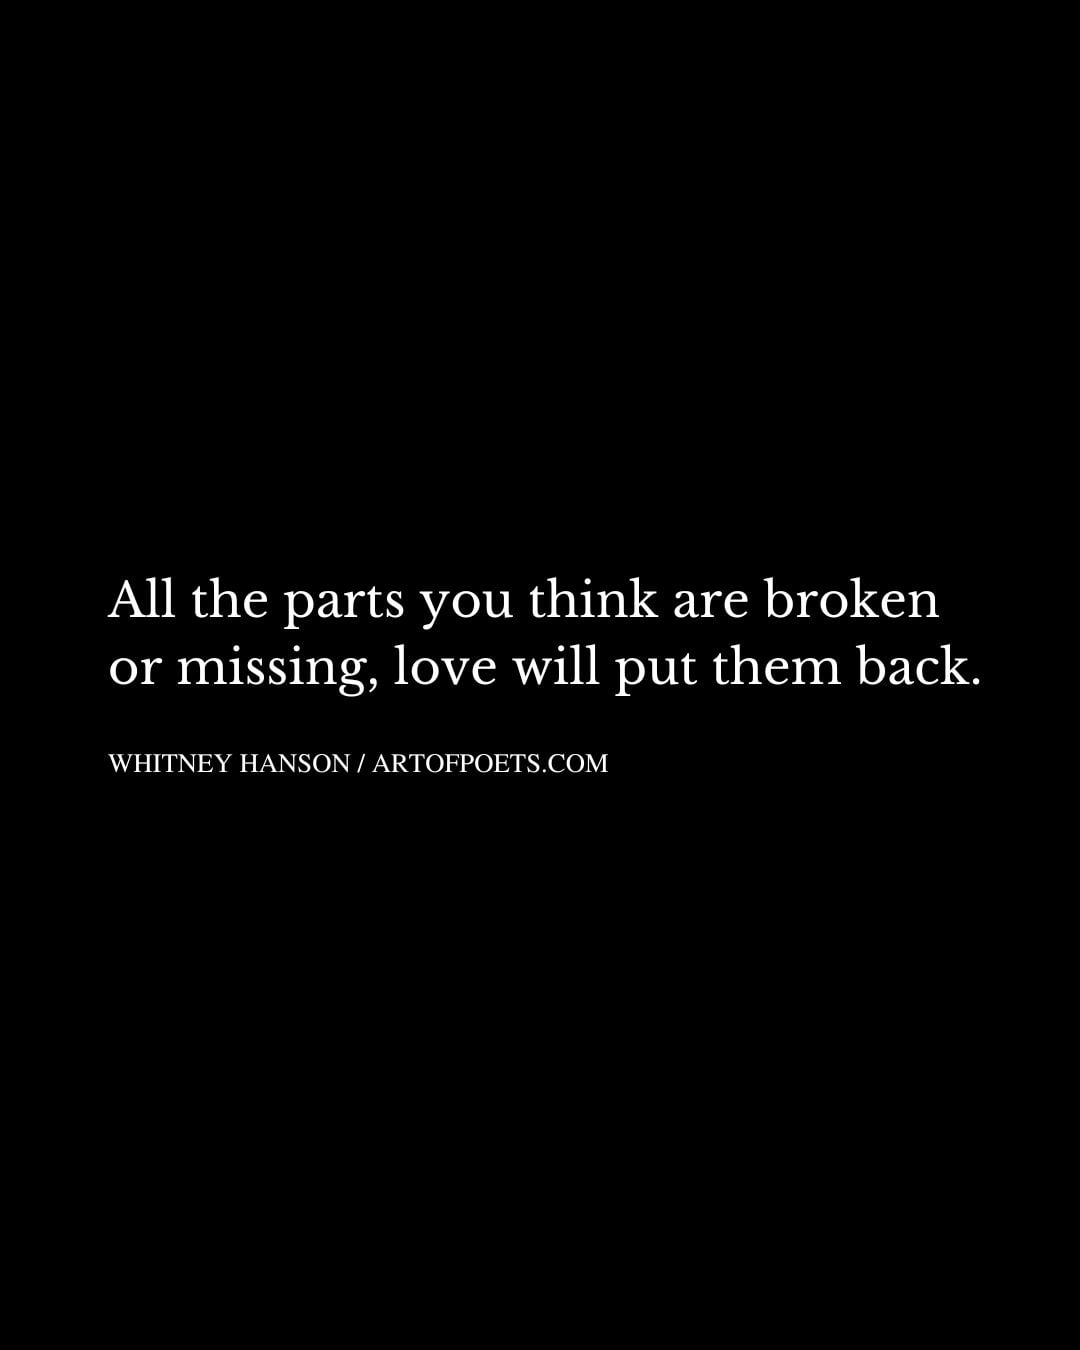 All the parts you think are broken or missing love will put them back